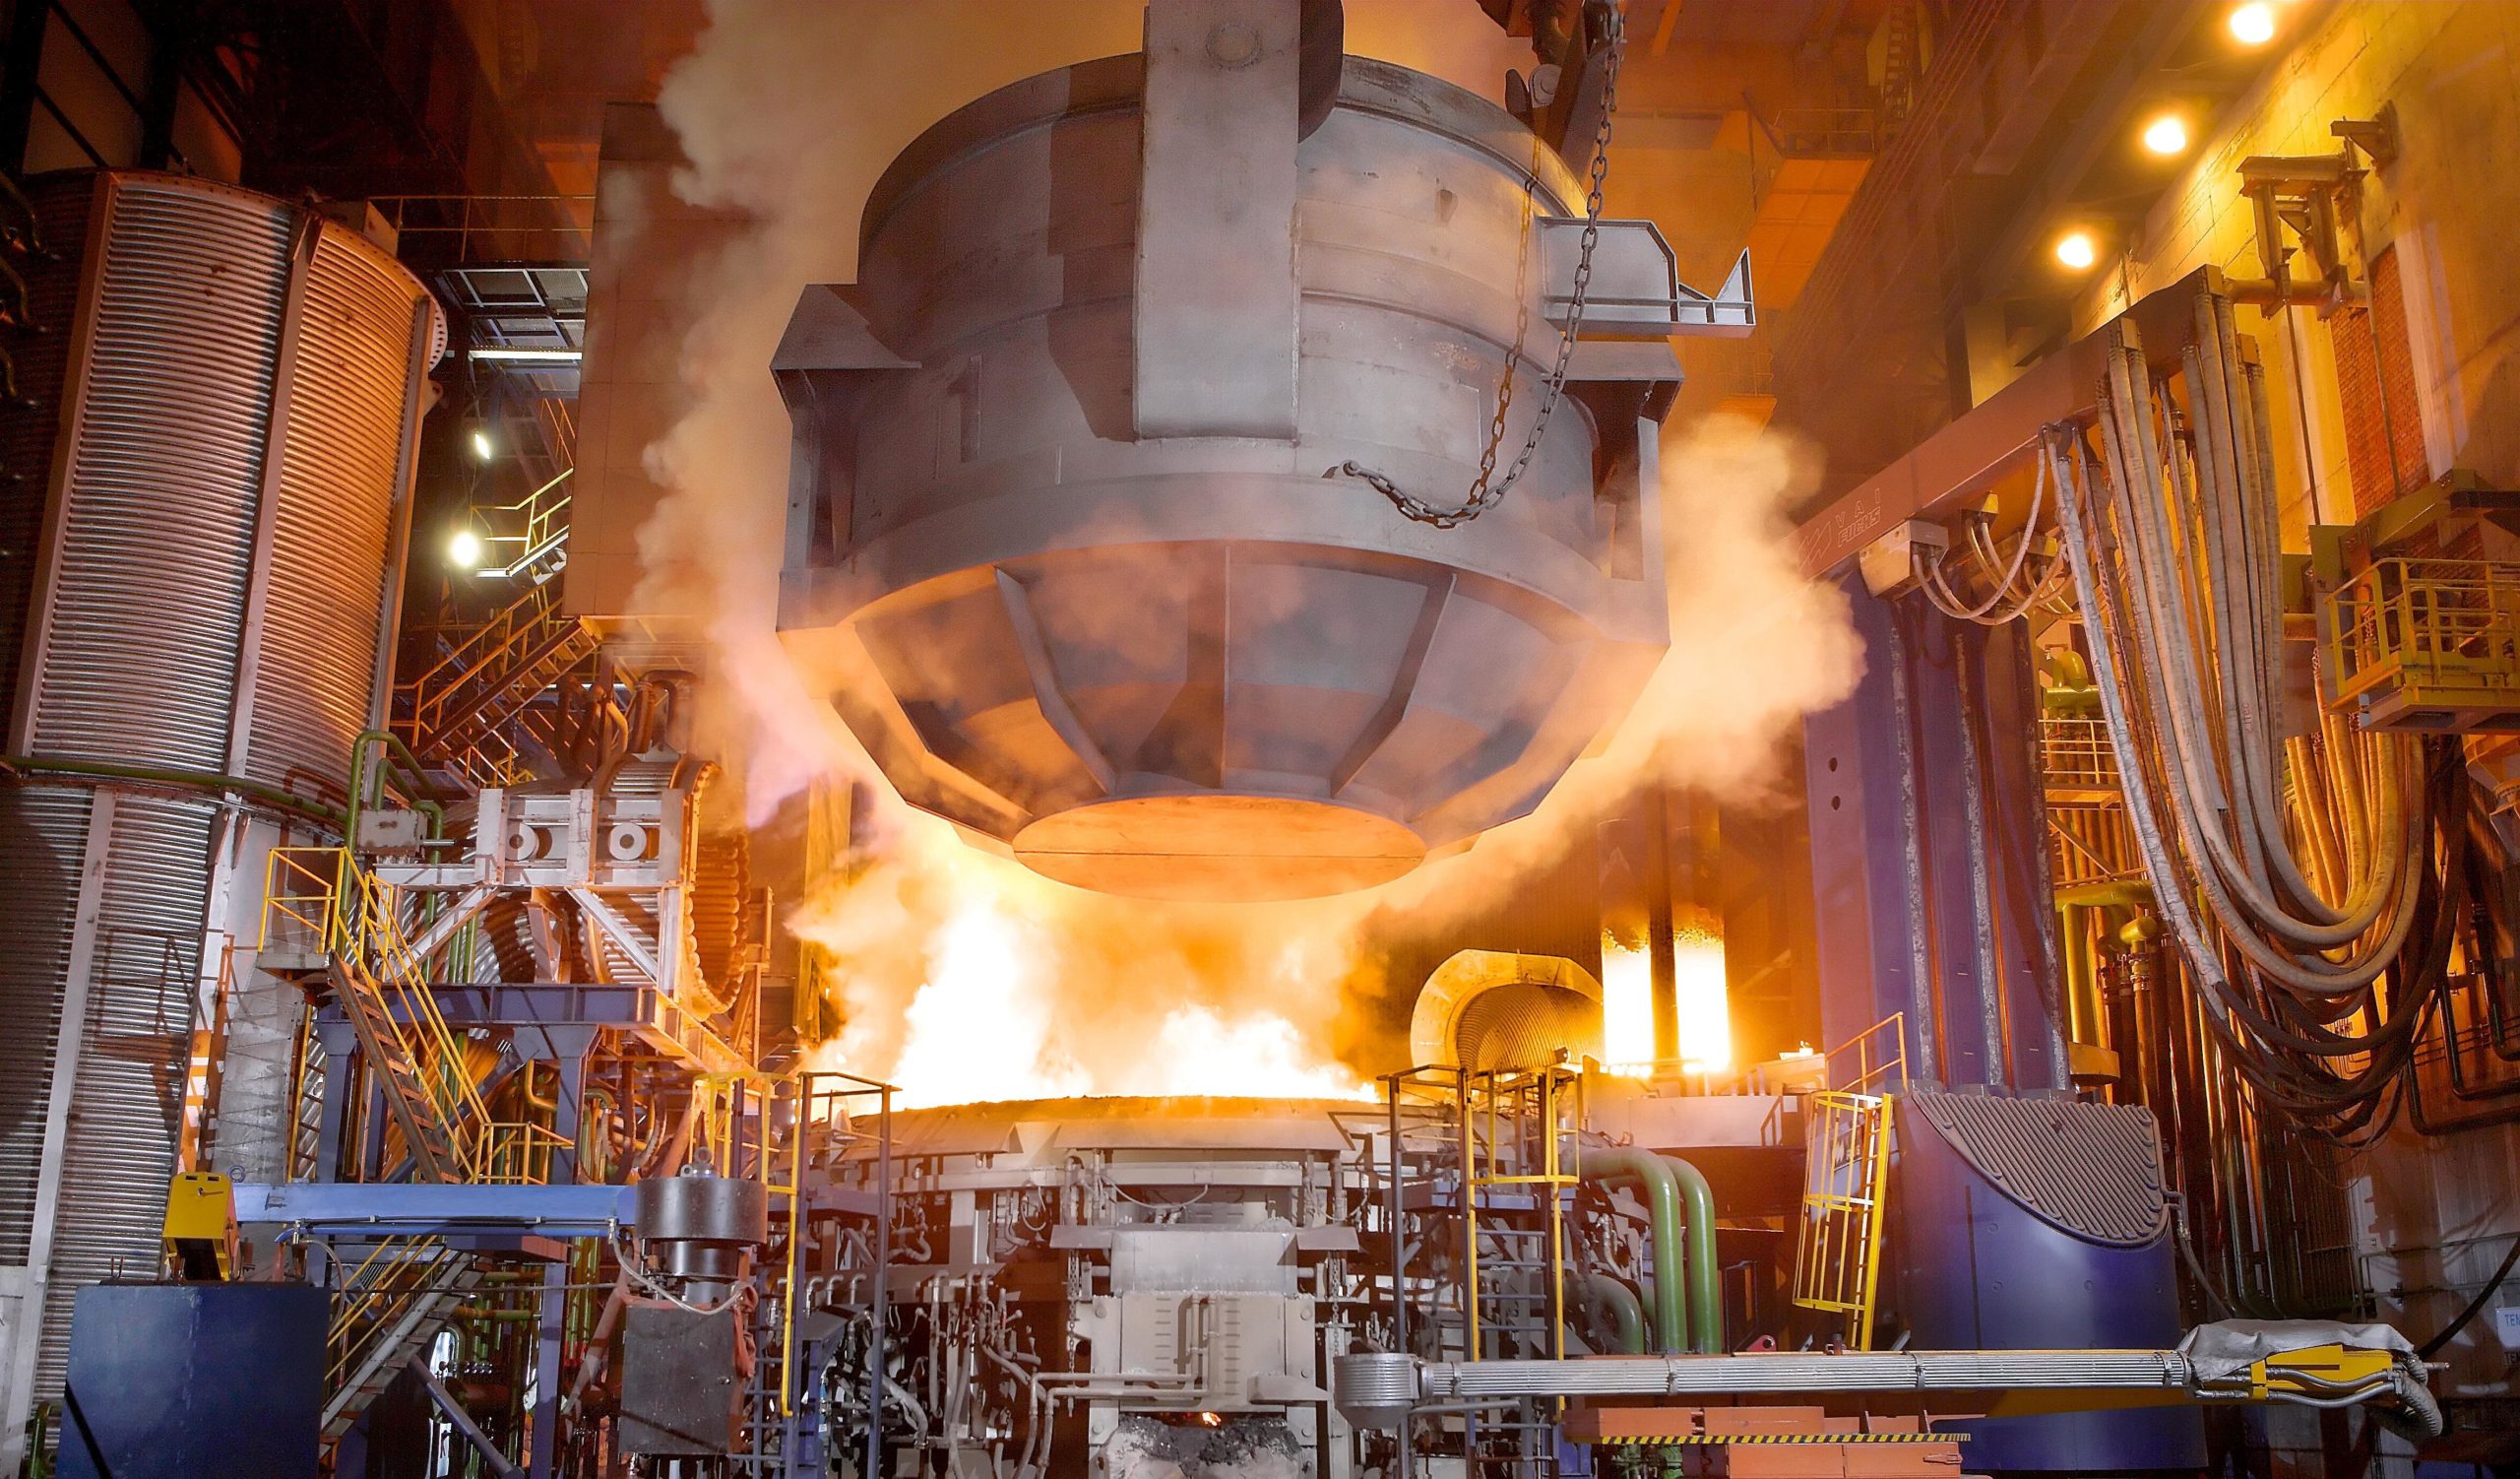 LIBERTY signs agreement to purchase plant and equipment from KG Steel